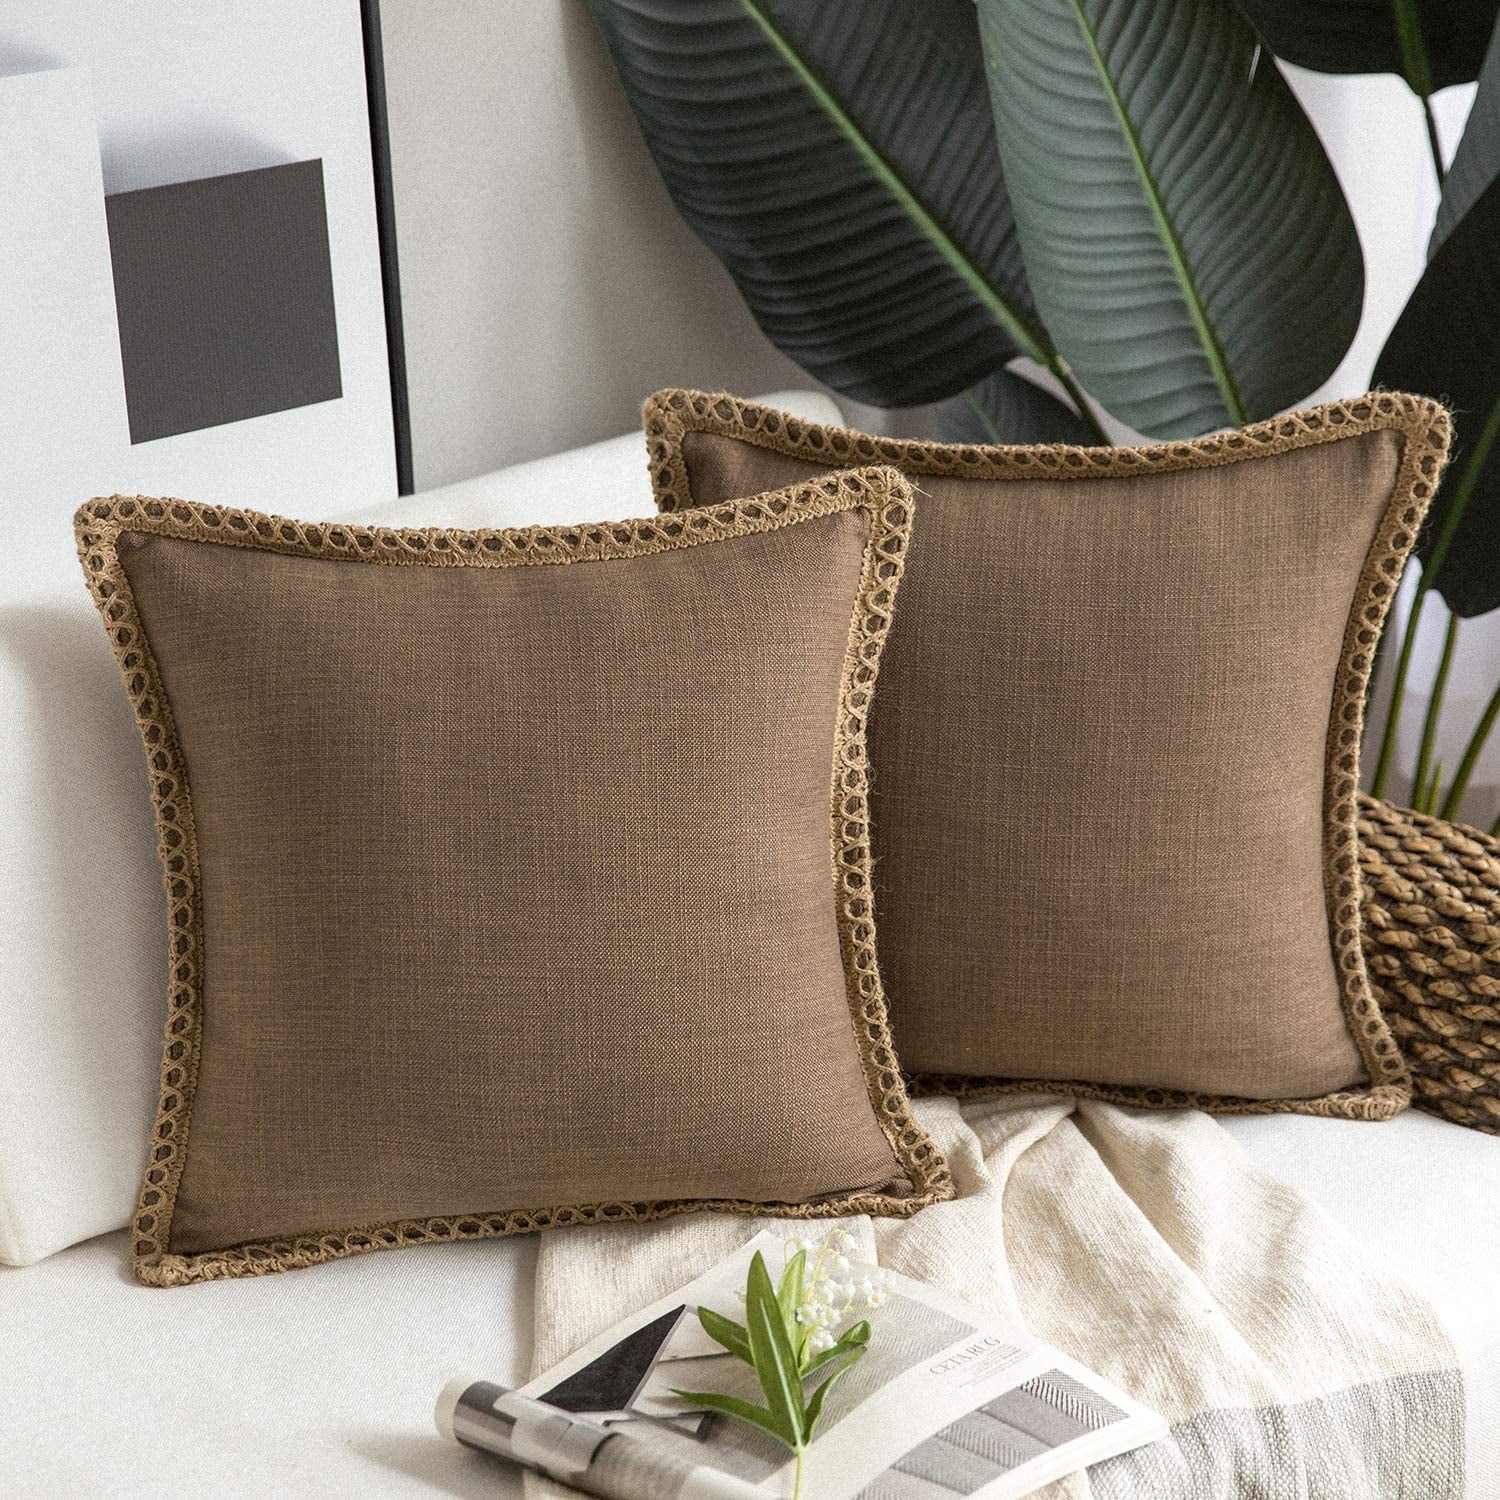 Caflife Throw Pillow Covers 20x20 for Boho Bed Couch, 2 Pack Elegant Home  Decorative Off White with Tassels Linen Burlap Throw Pillows for Farmhouse